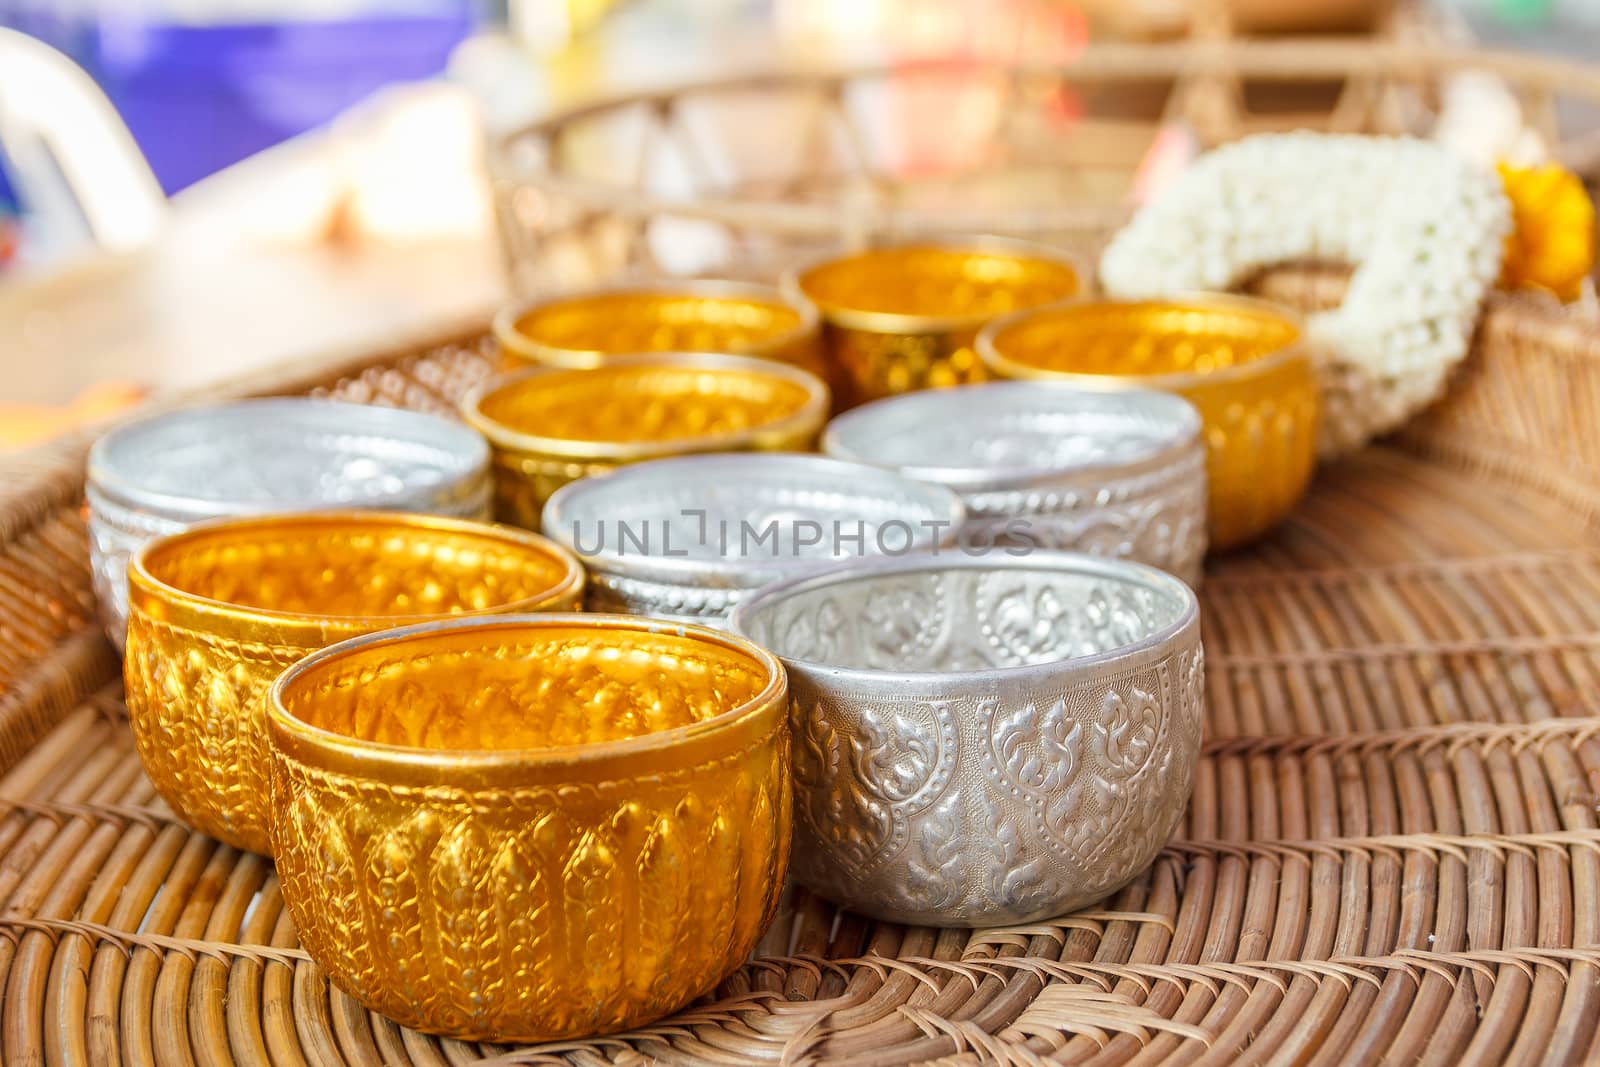 Gold and silver bowl on wooden basket and flower garland in background.